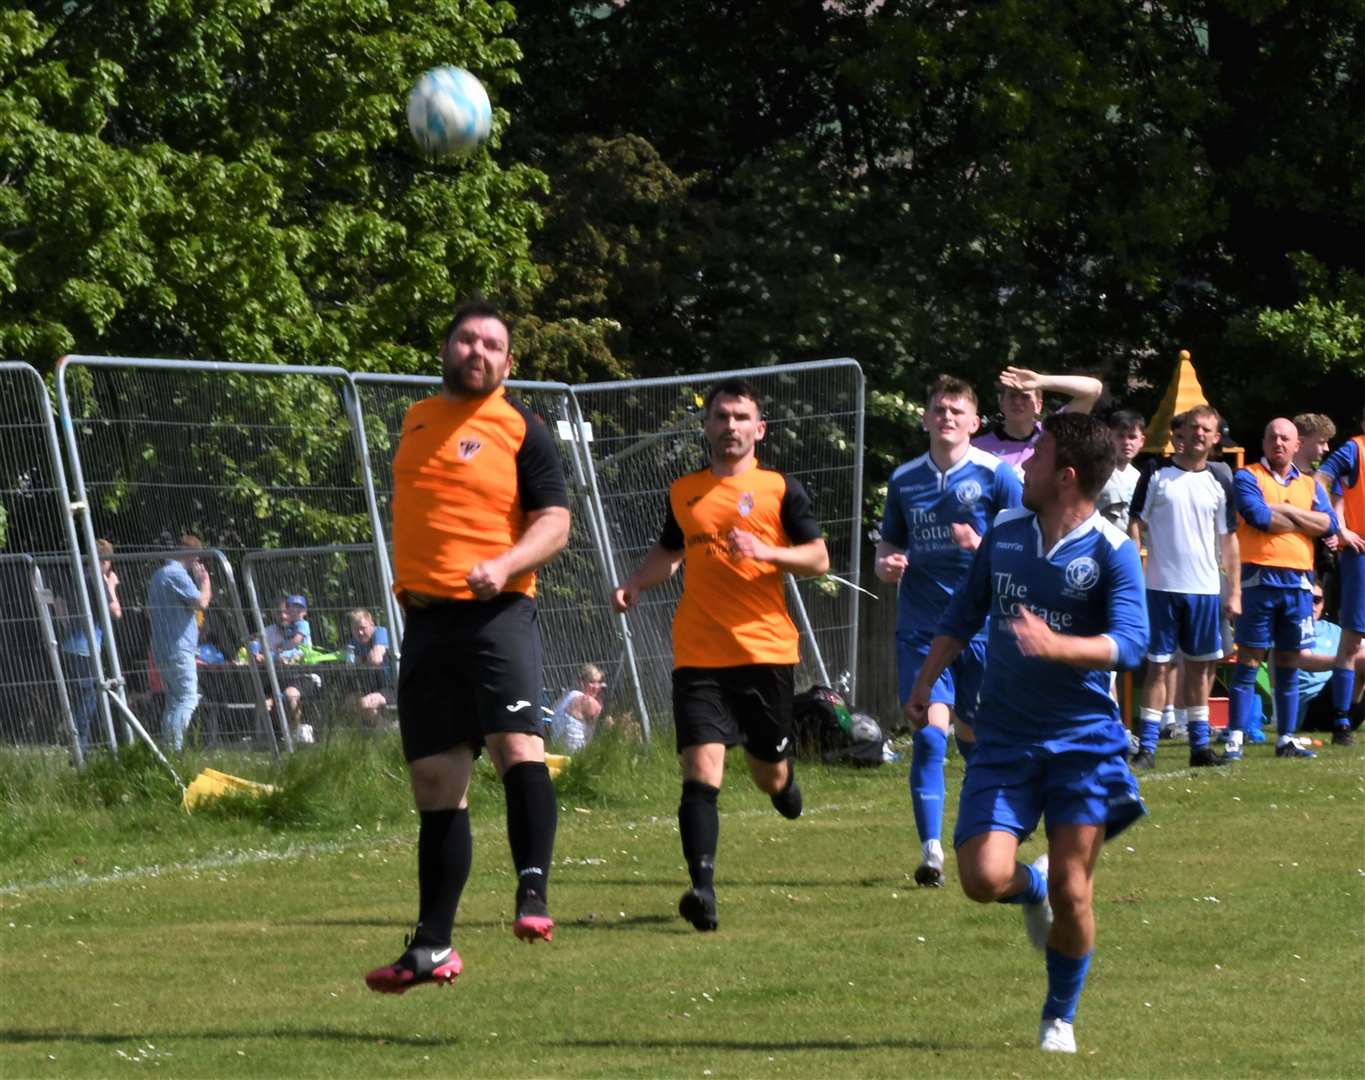 Avoch will be looking to cap off a good week by progressing in the Highland Amateur Cup.